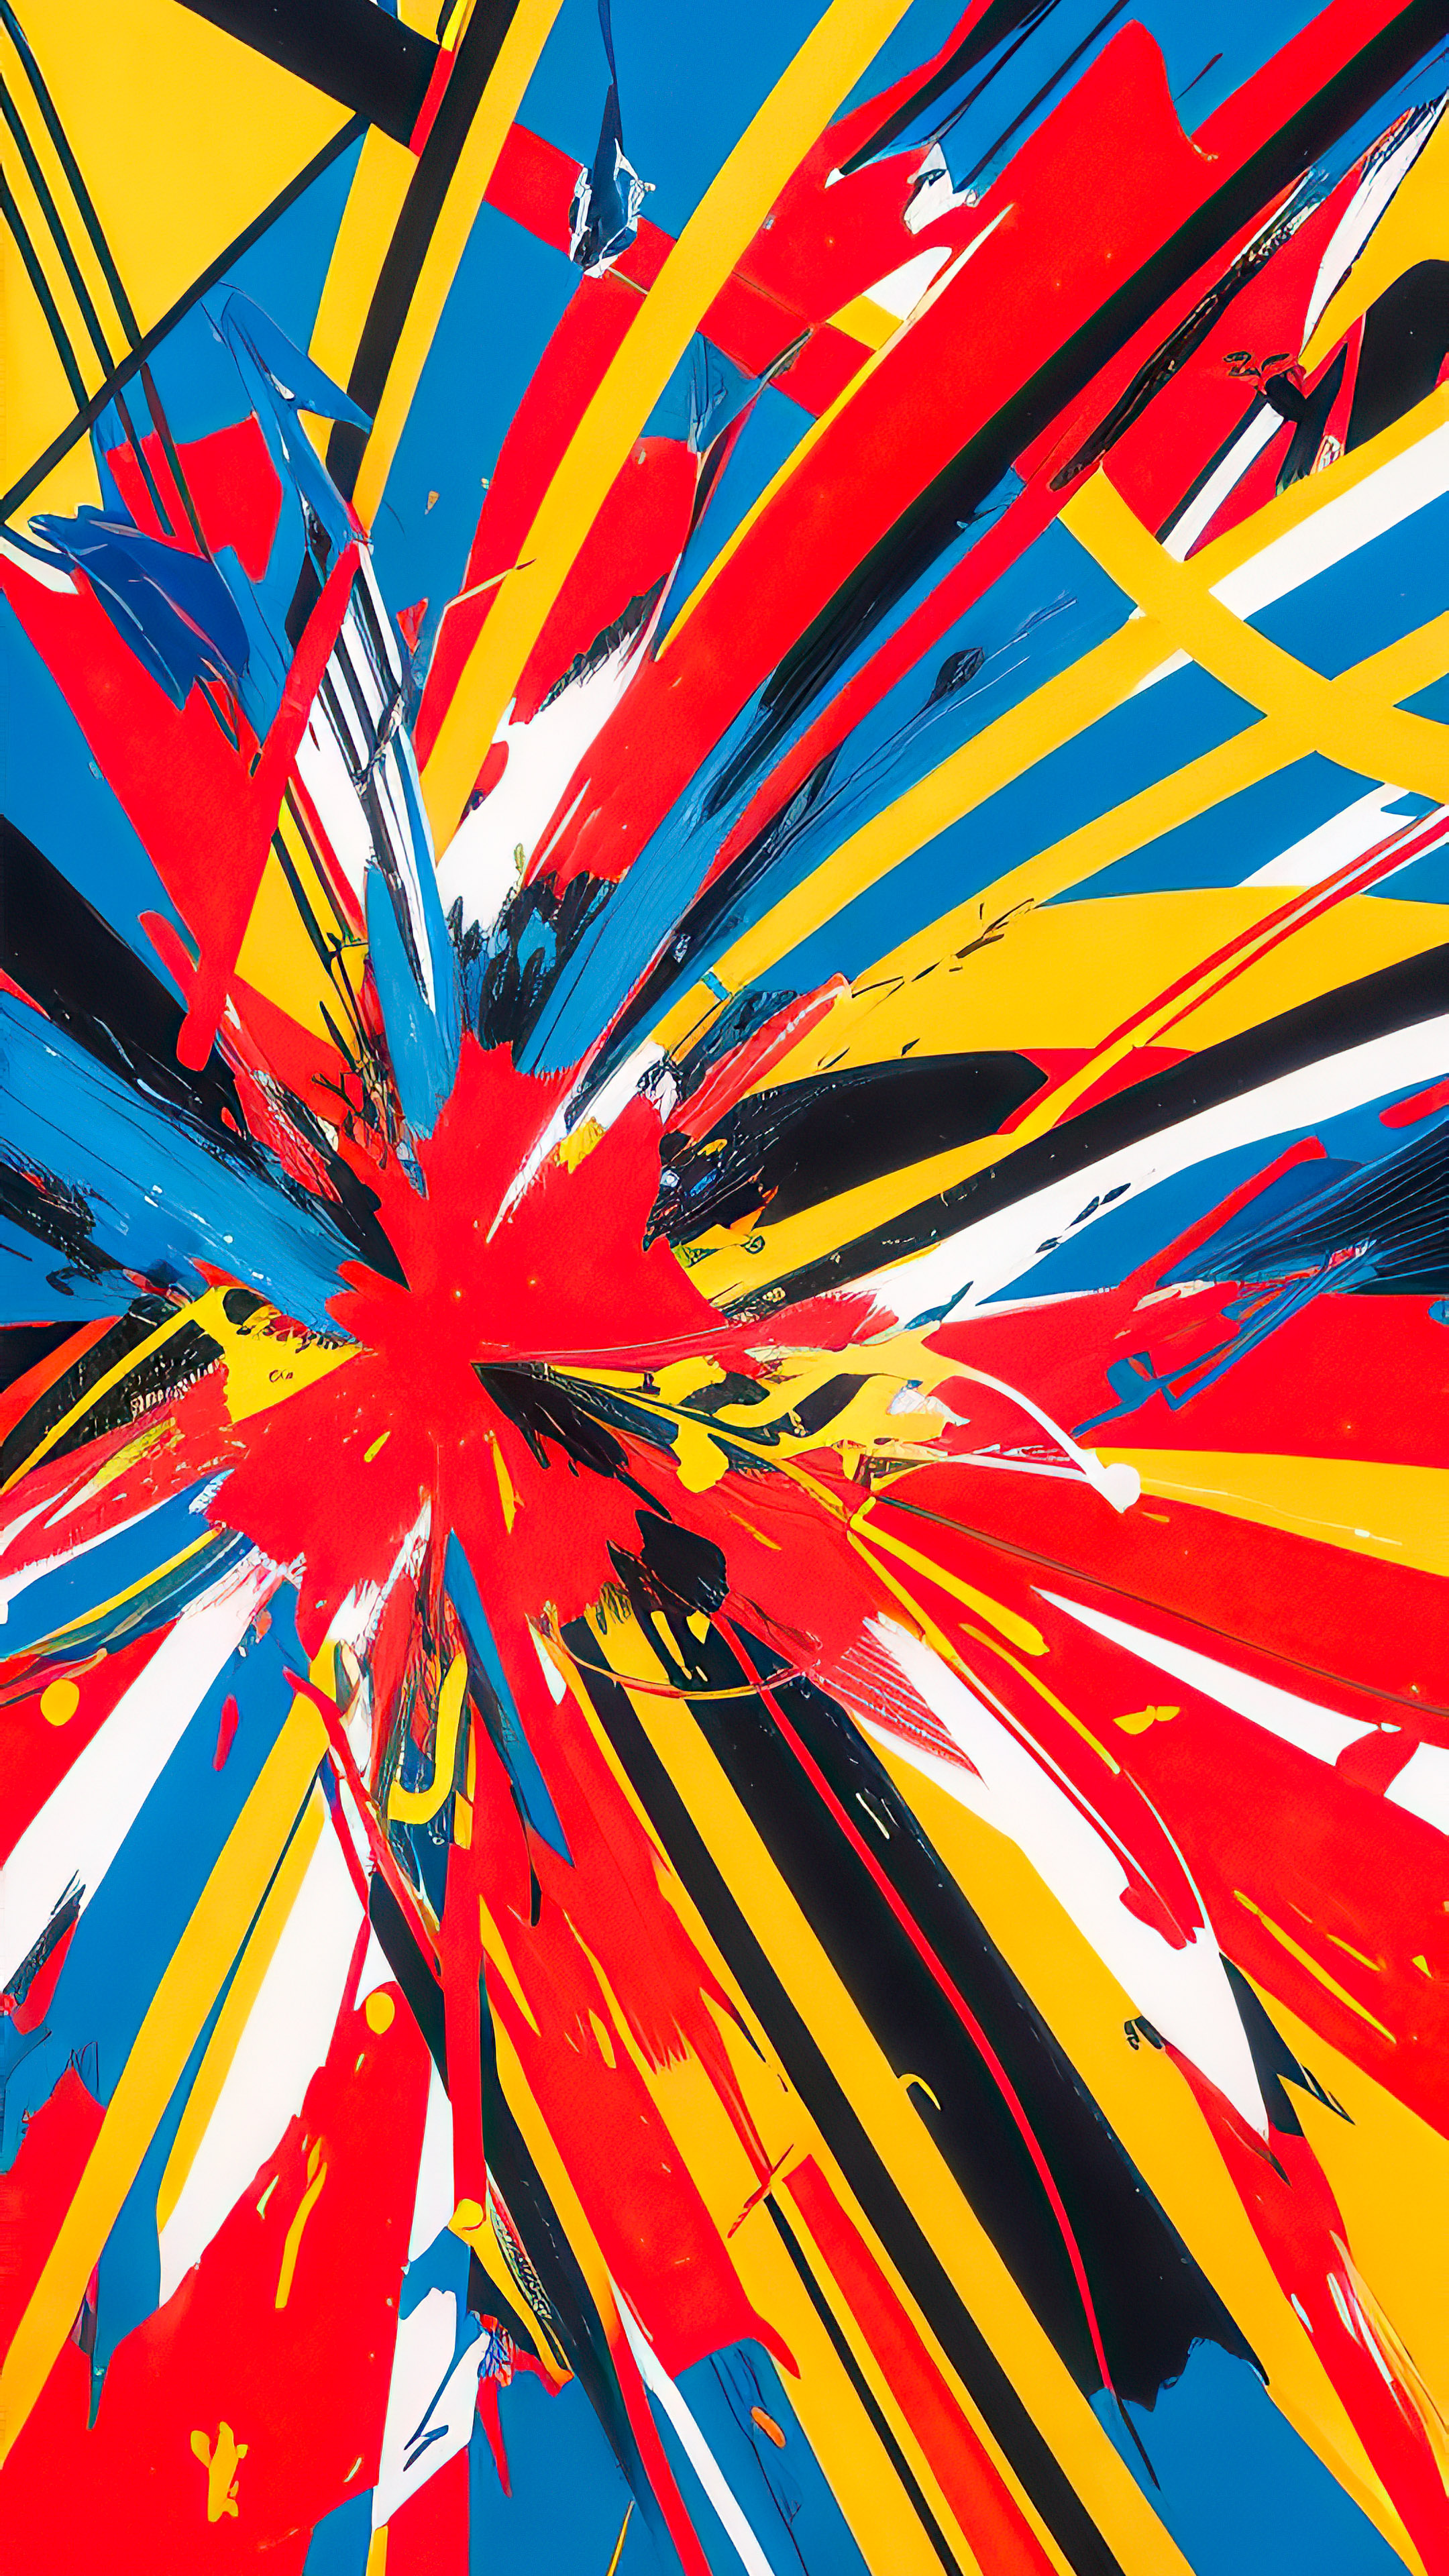 Transform your iPhone screen with the chaos and creativity of our new abstract wallpaper.